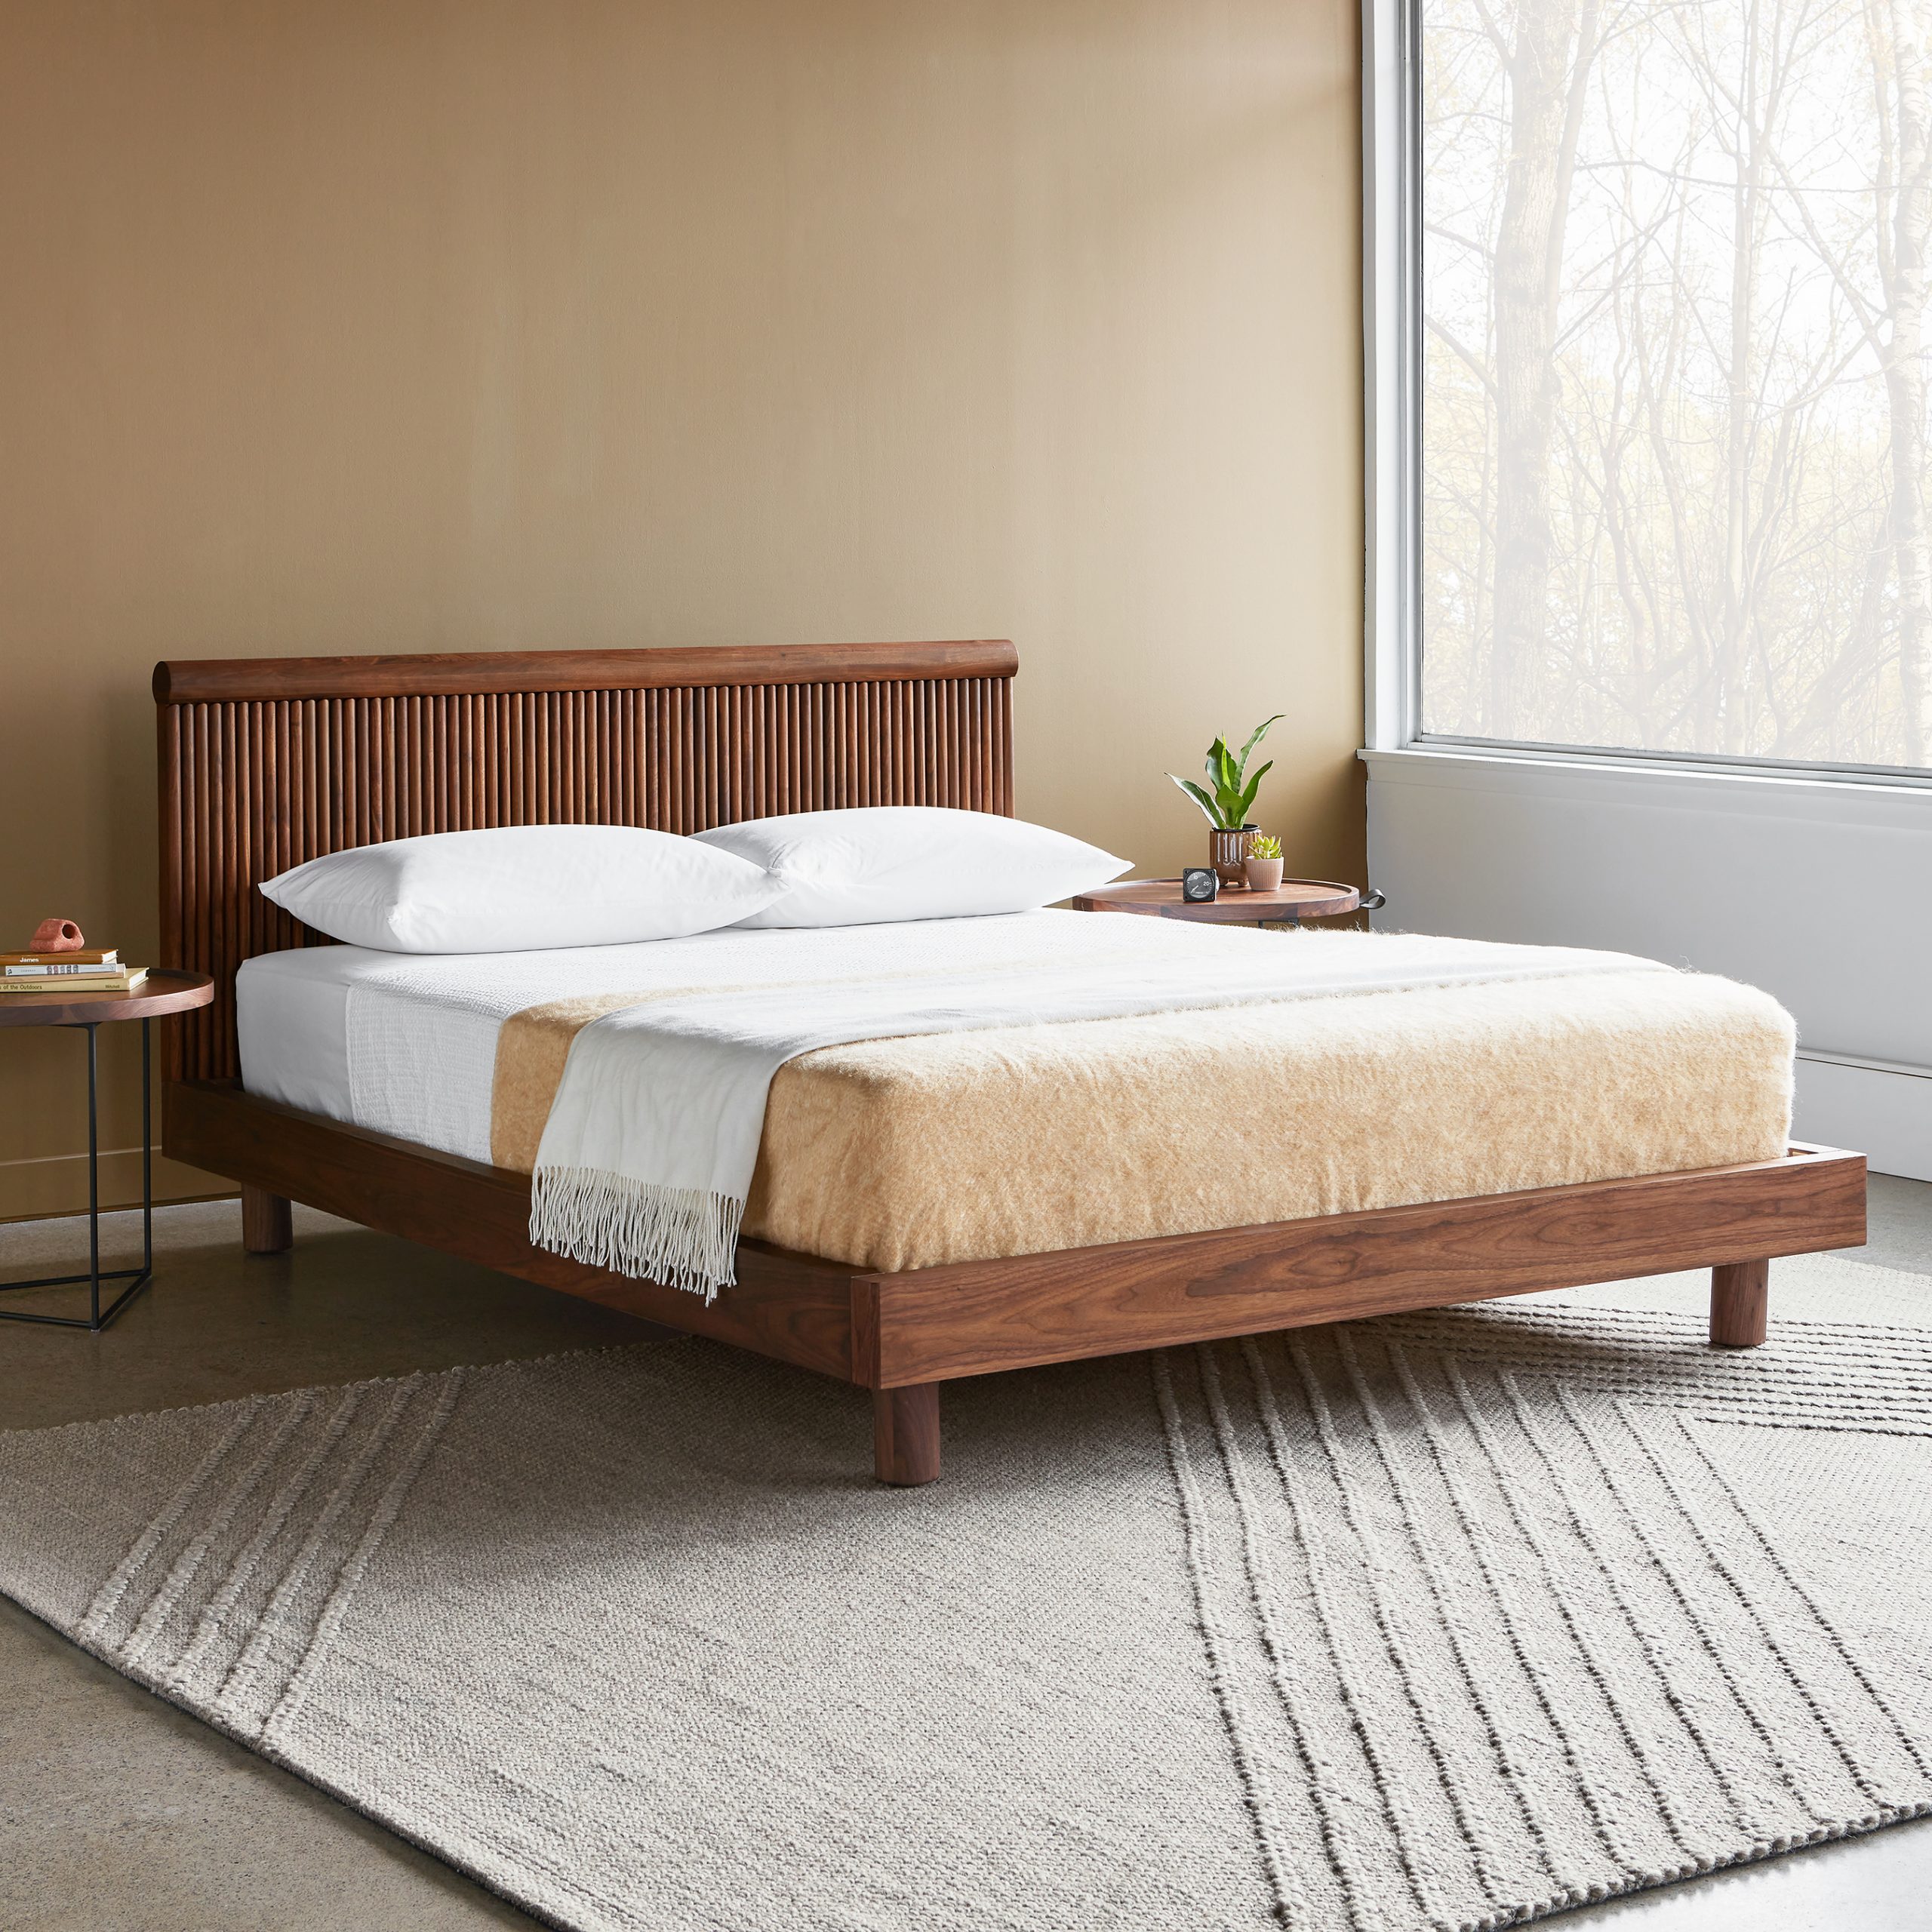 The Odeon Bed in Walnut